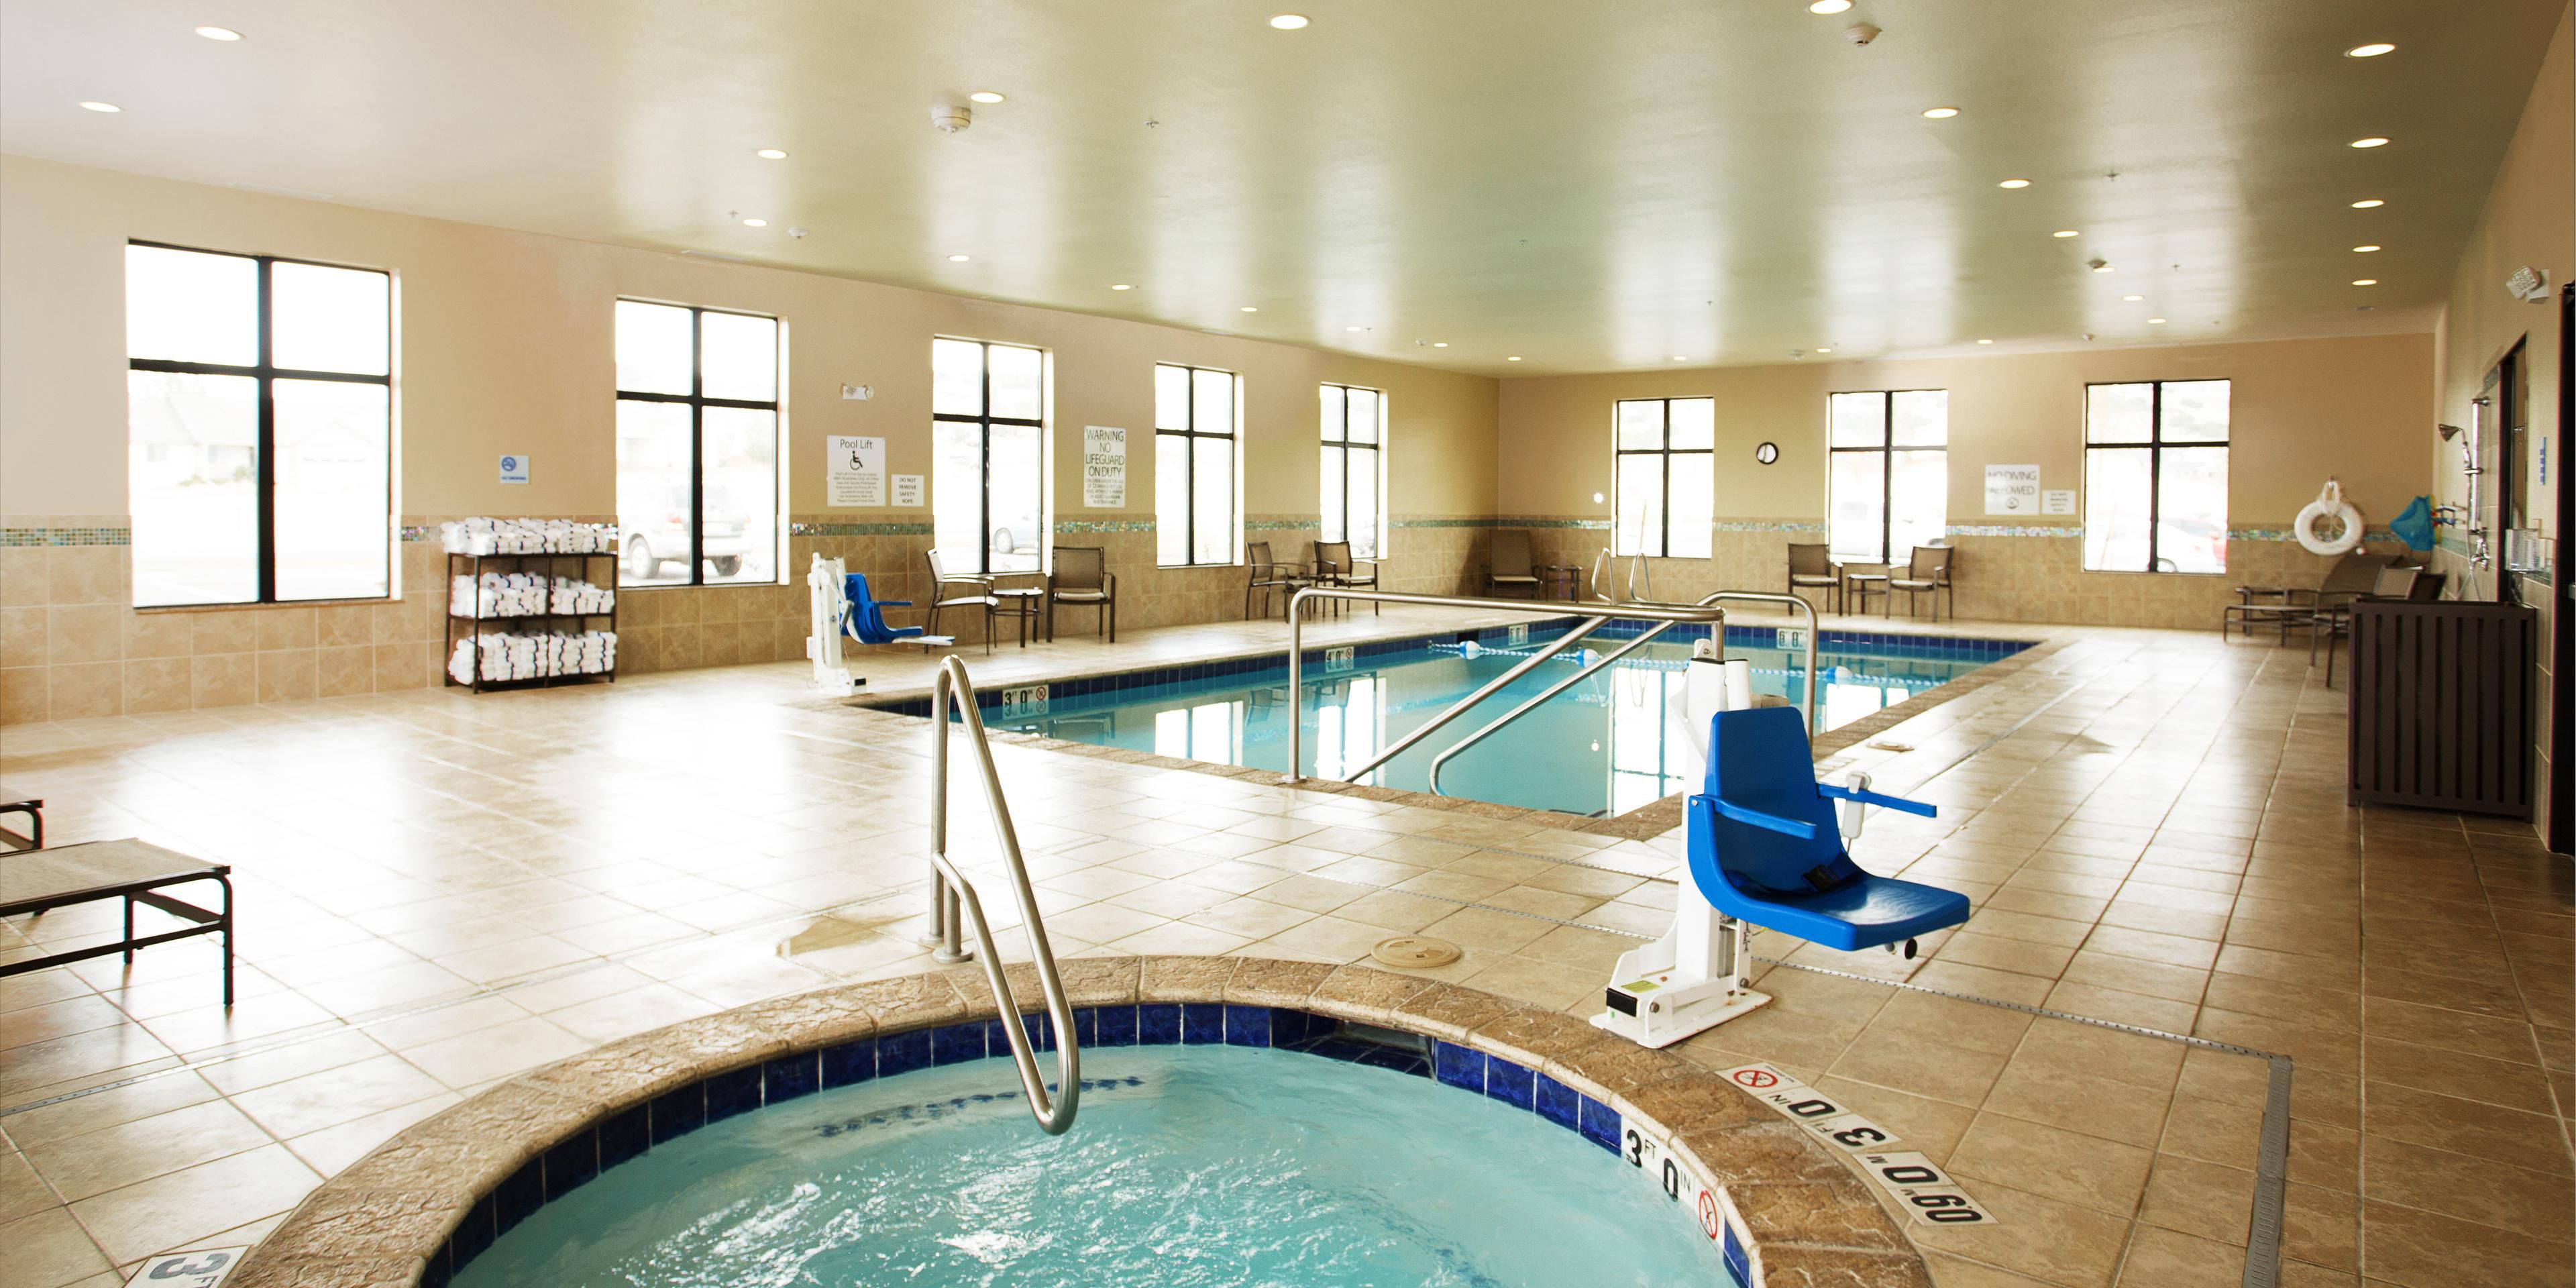 Hotel is fully opened  with additional safety guidelines set in place. Come enjoy our 24 hour Fitness Center and Pool, and hot breakfast served daily.